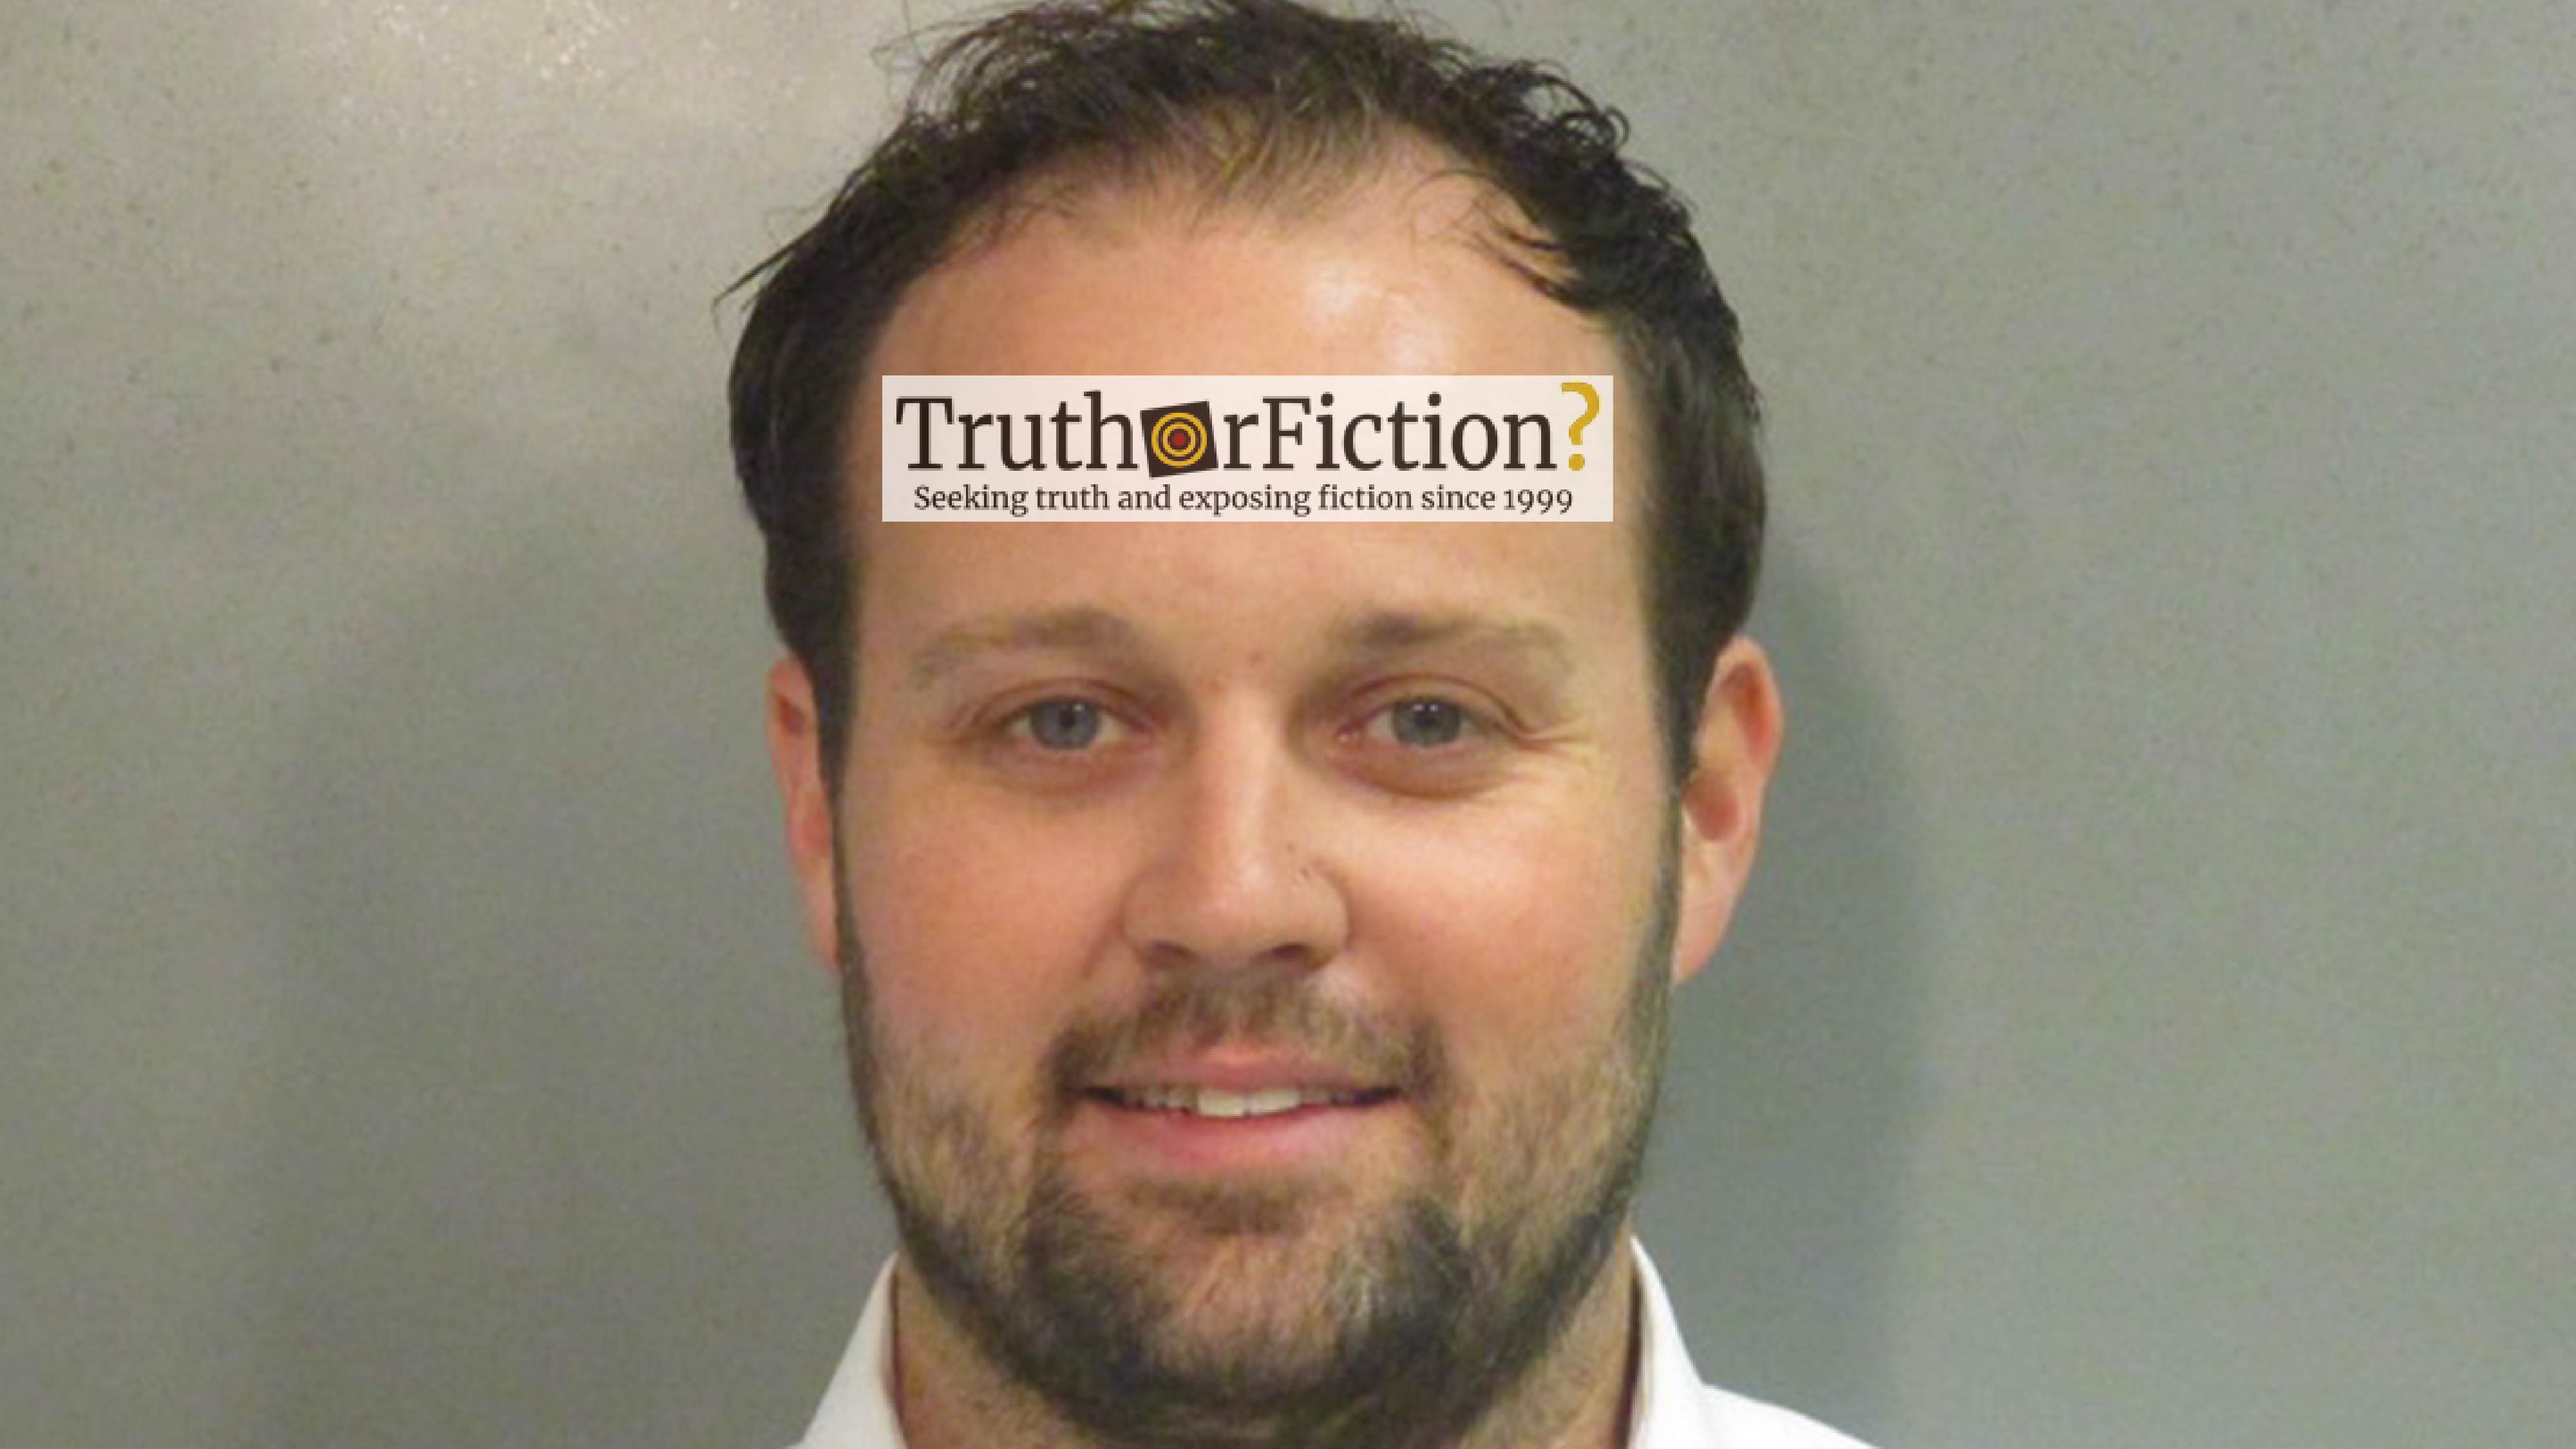 ’19 Kids and Counting’ Star Josh Duggar Sentenced On Child Pornography Charges